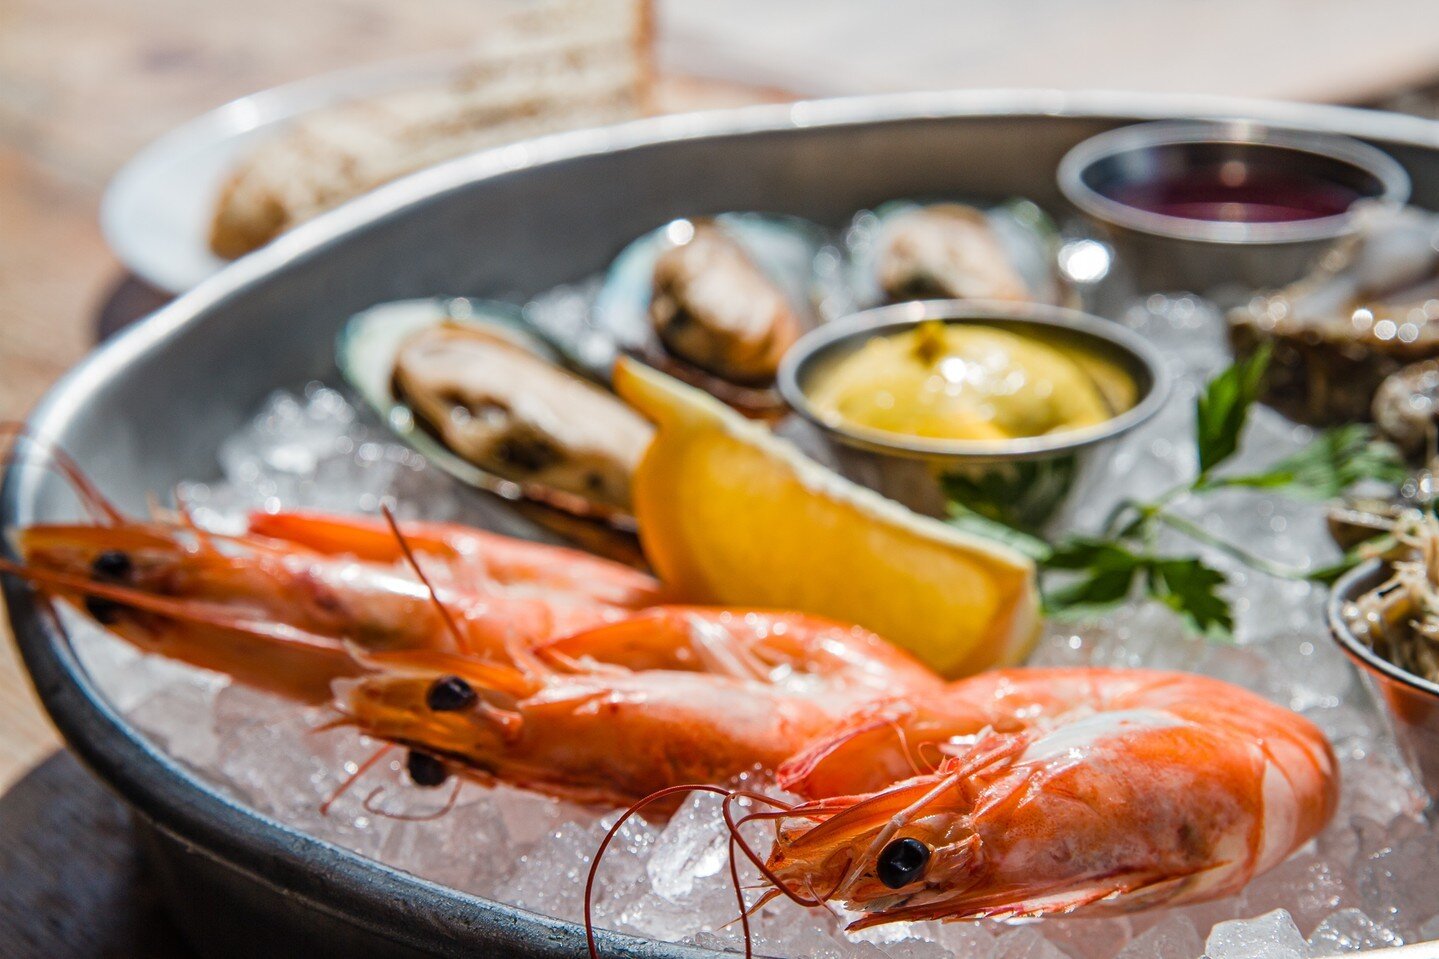 Maybe try something different?

#seafood #london #whatsforlunch